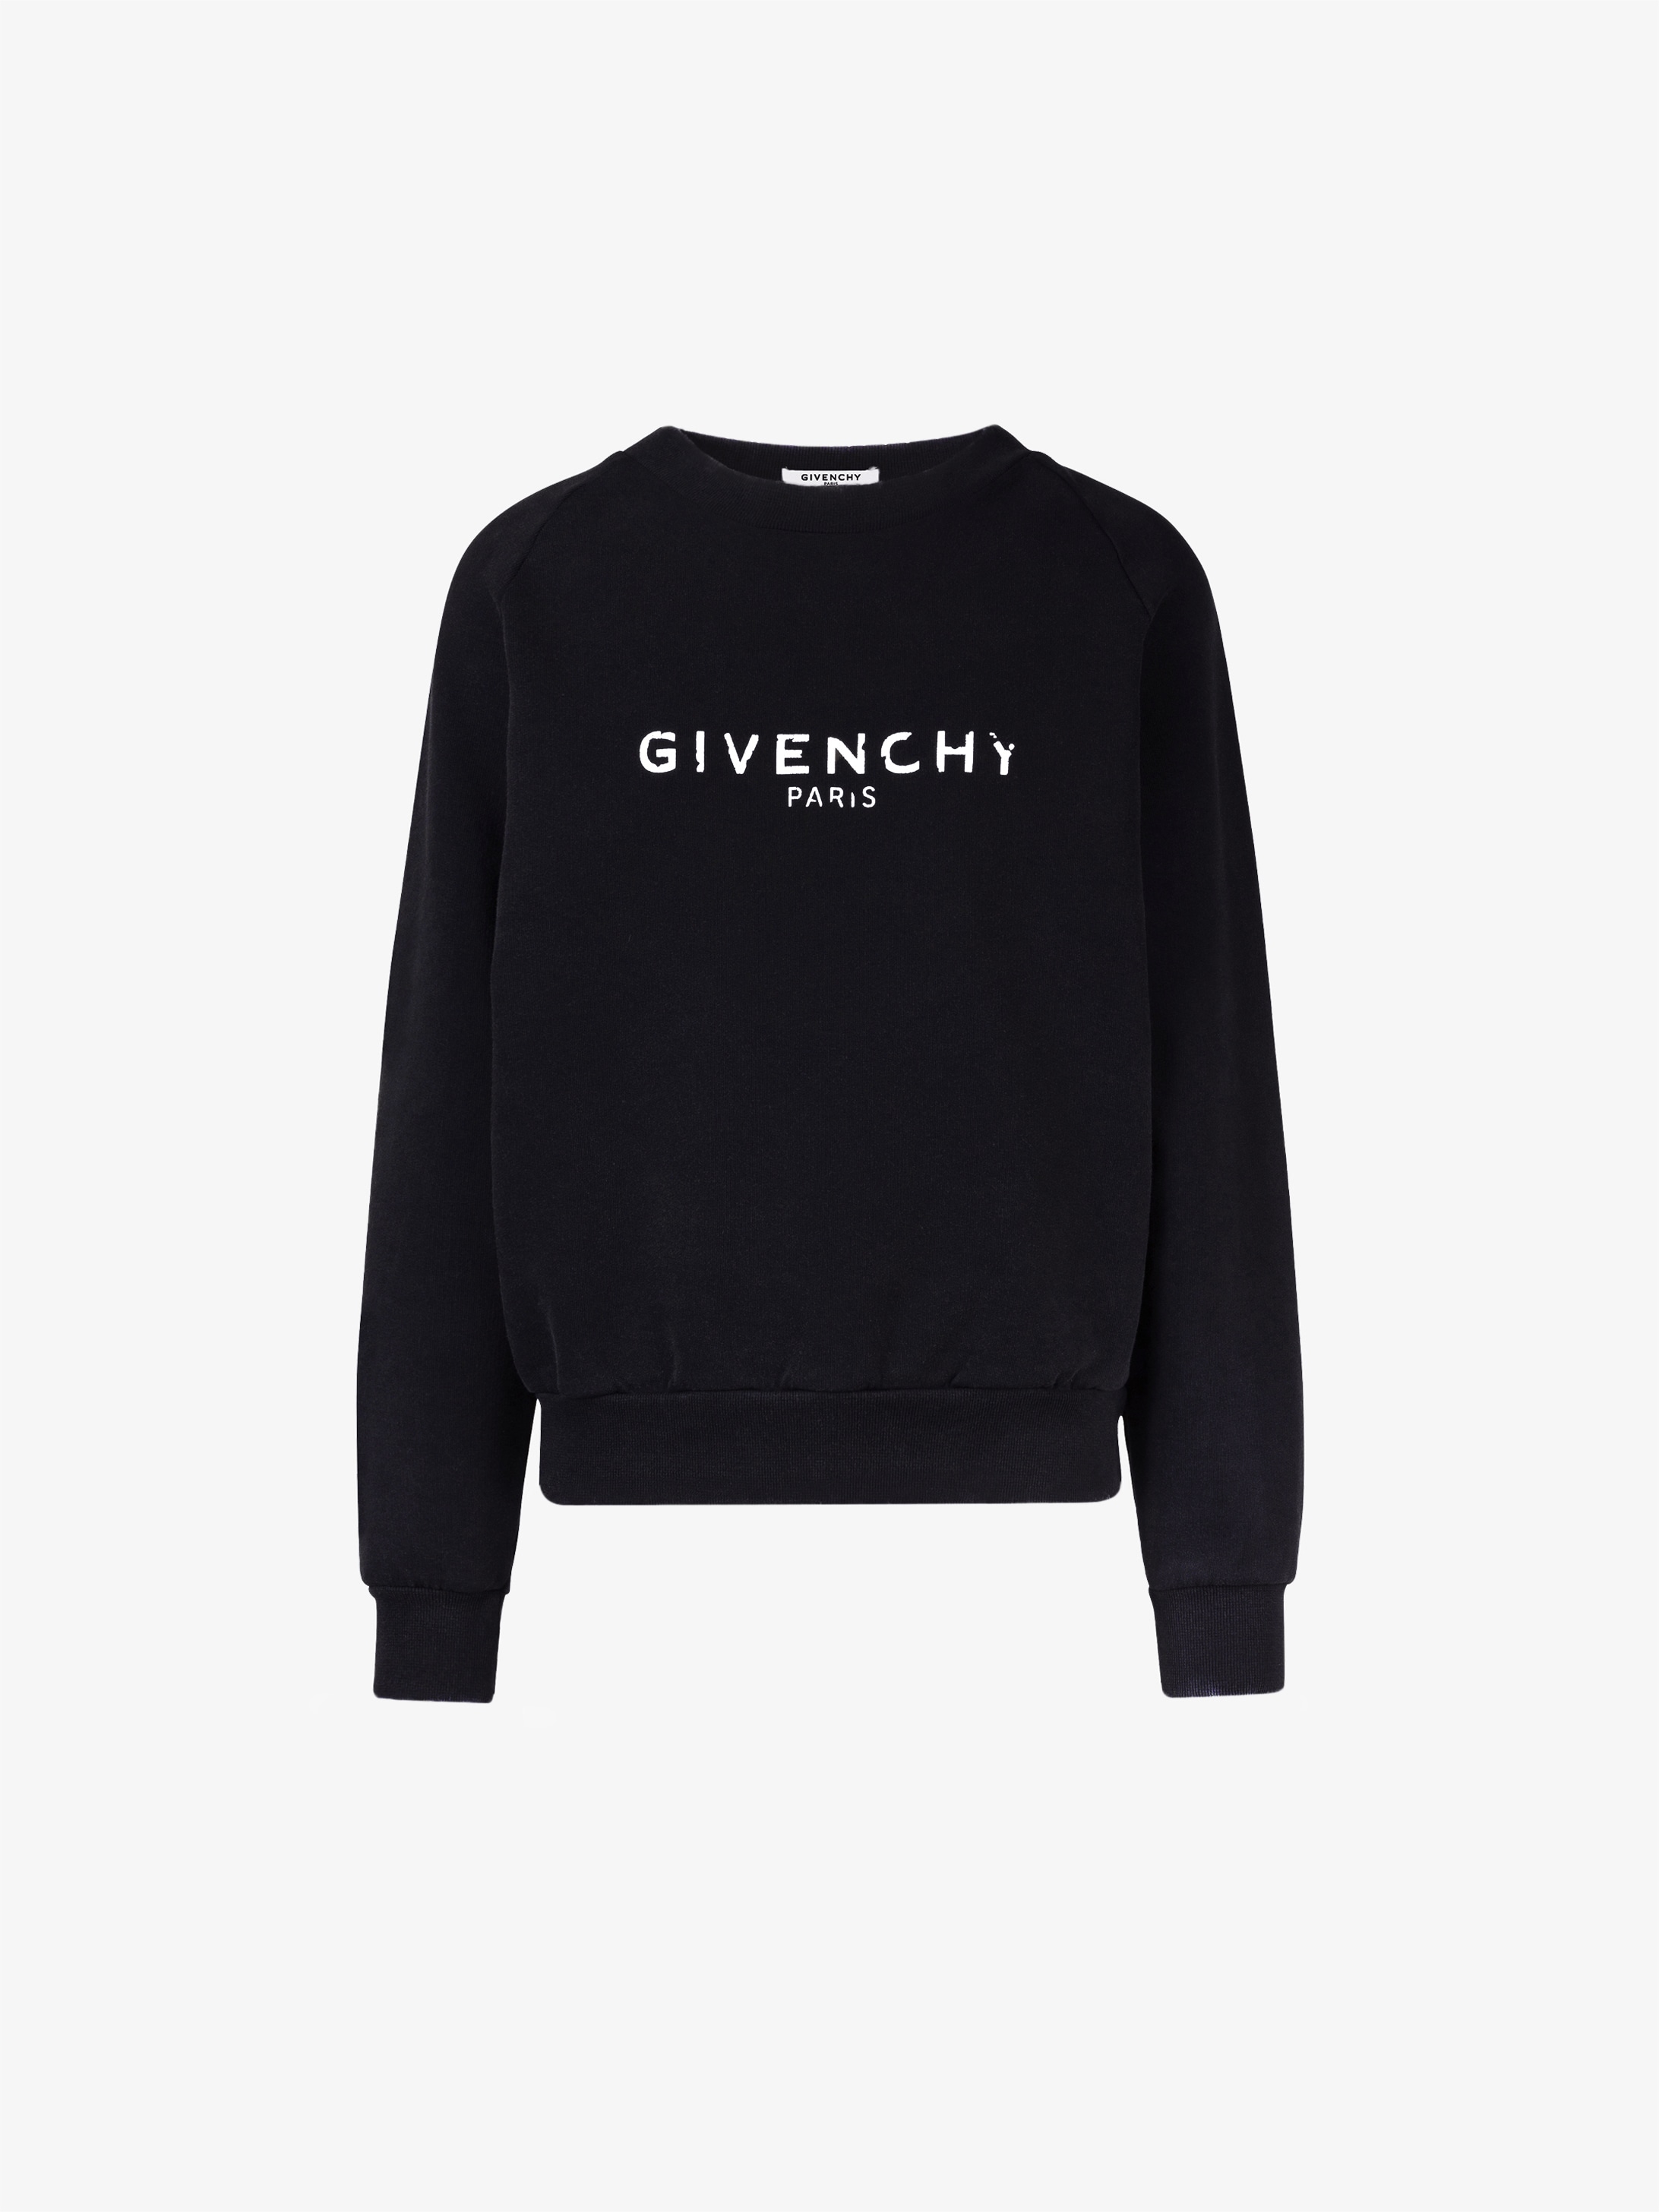 givenchy sweater white